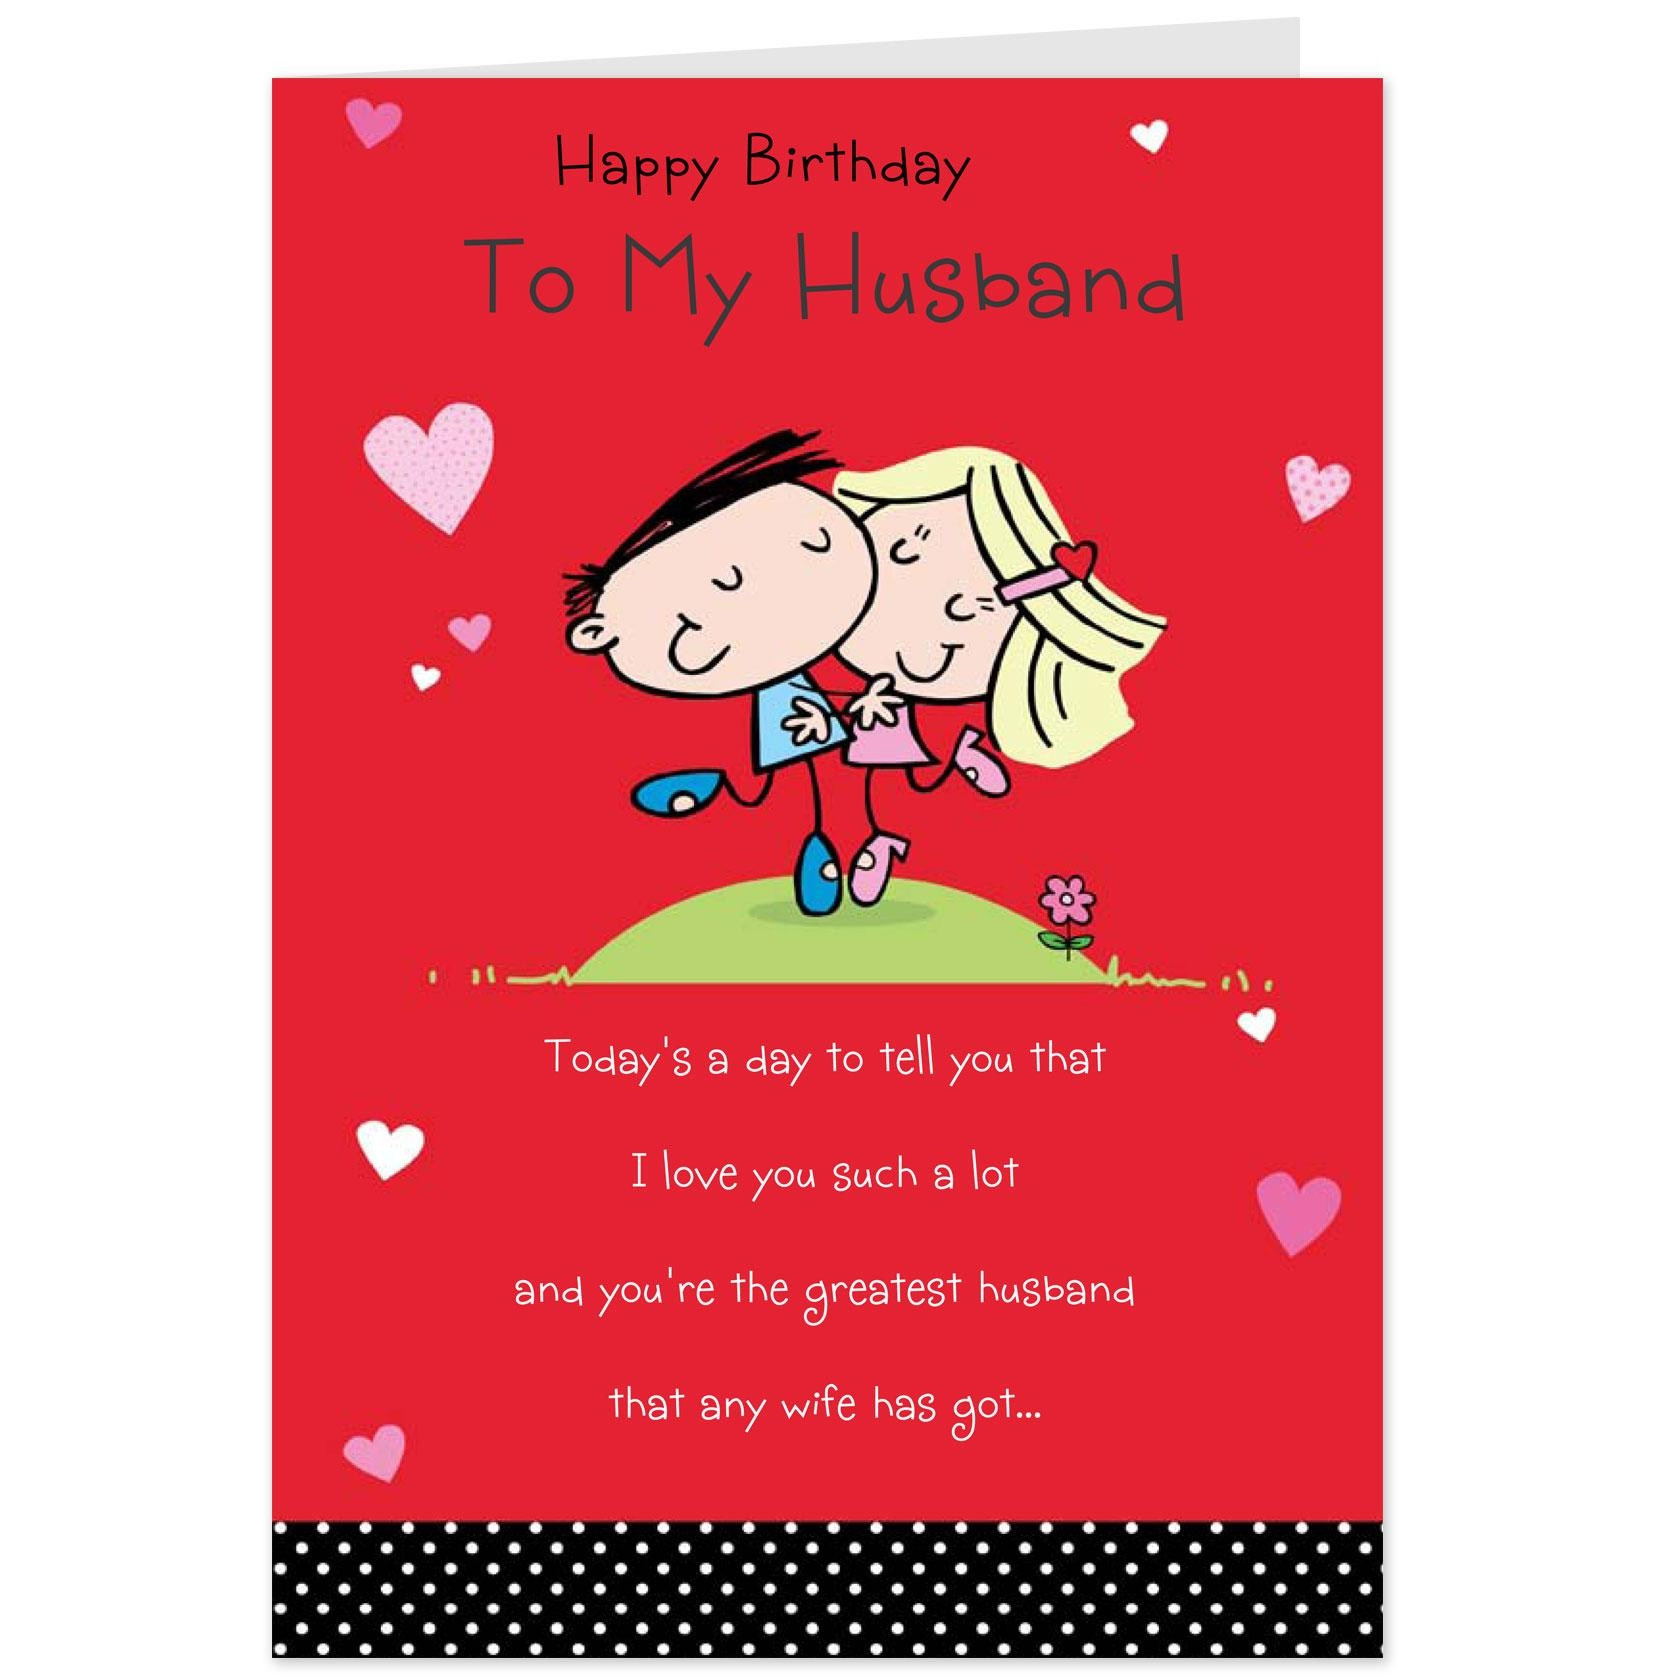 Funny Husband Birthday Cards
 The Best and Most prehensive Happy Birthday